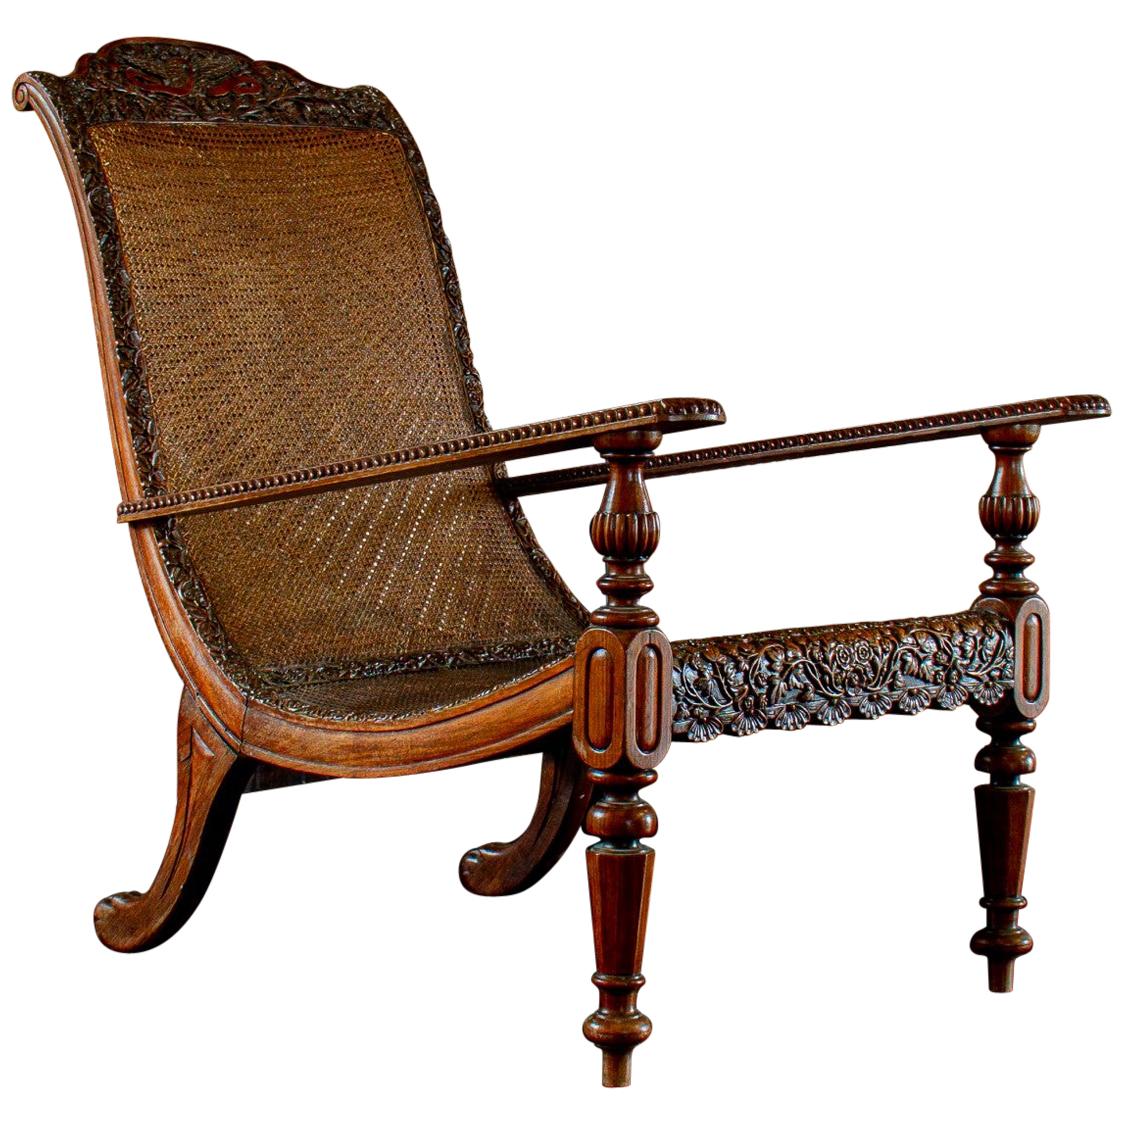 Early 19th Century Anglo-Indian Padouk Wood Armchair, circa 1830